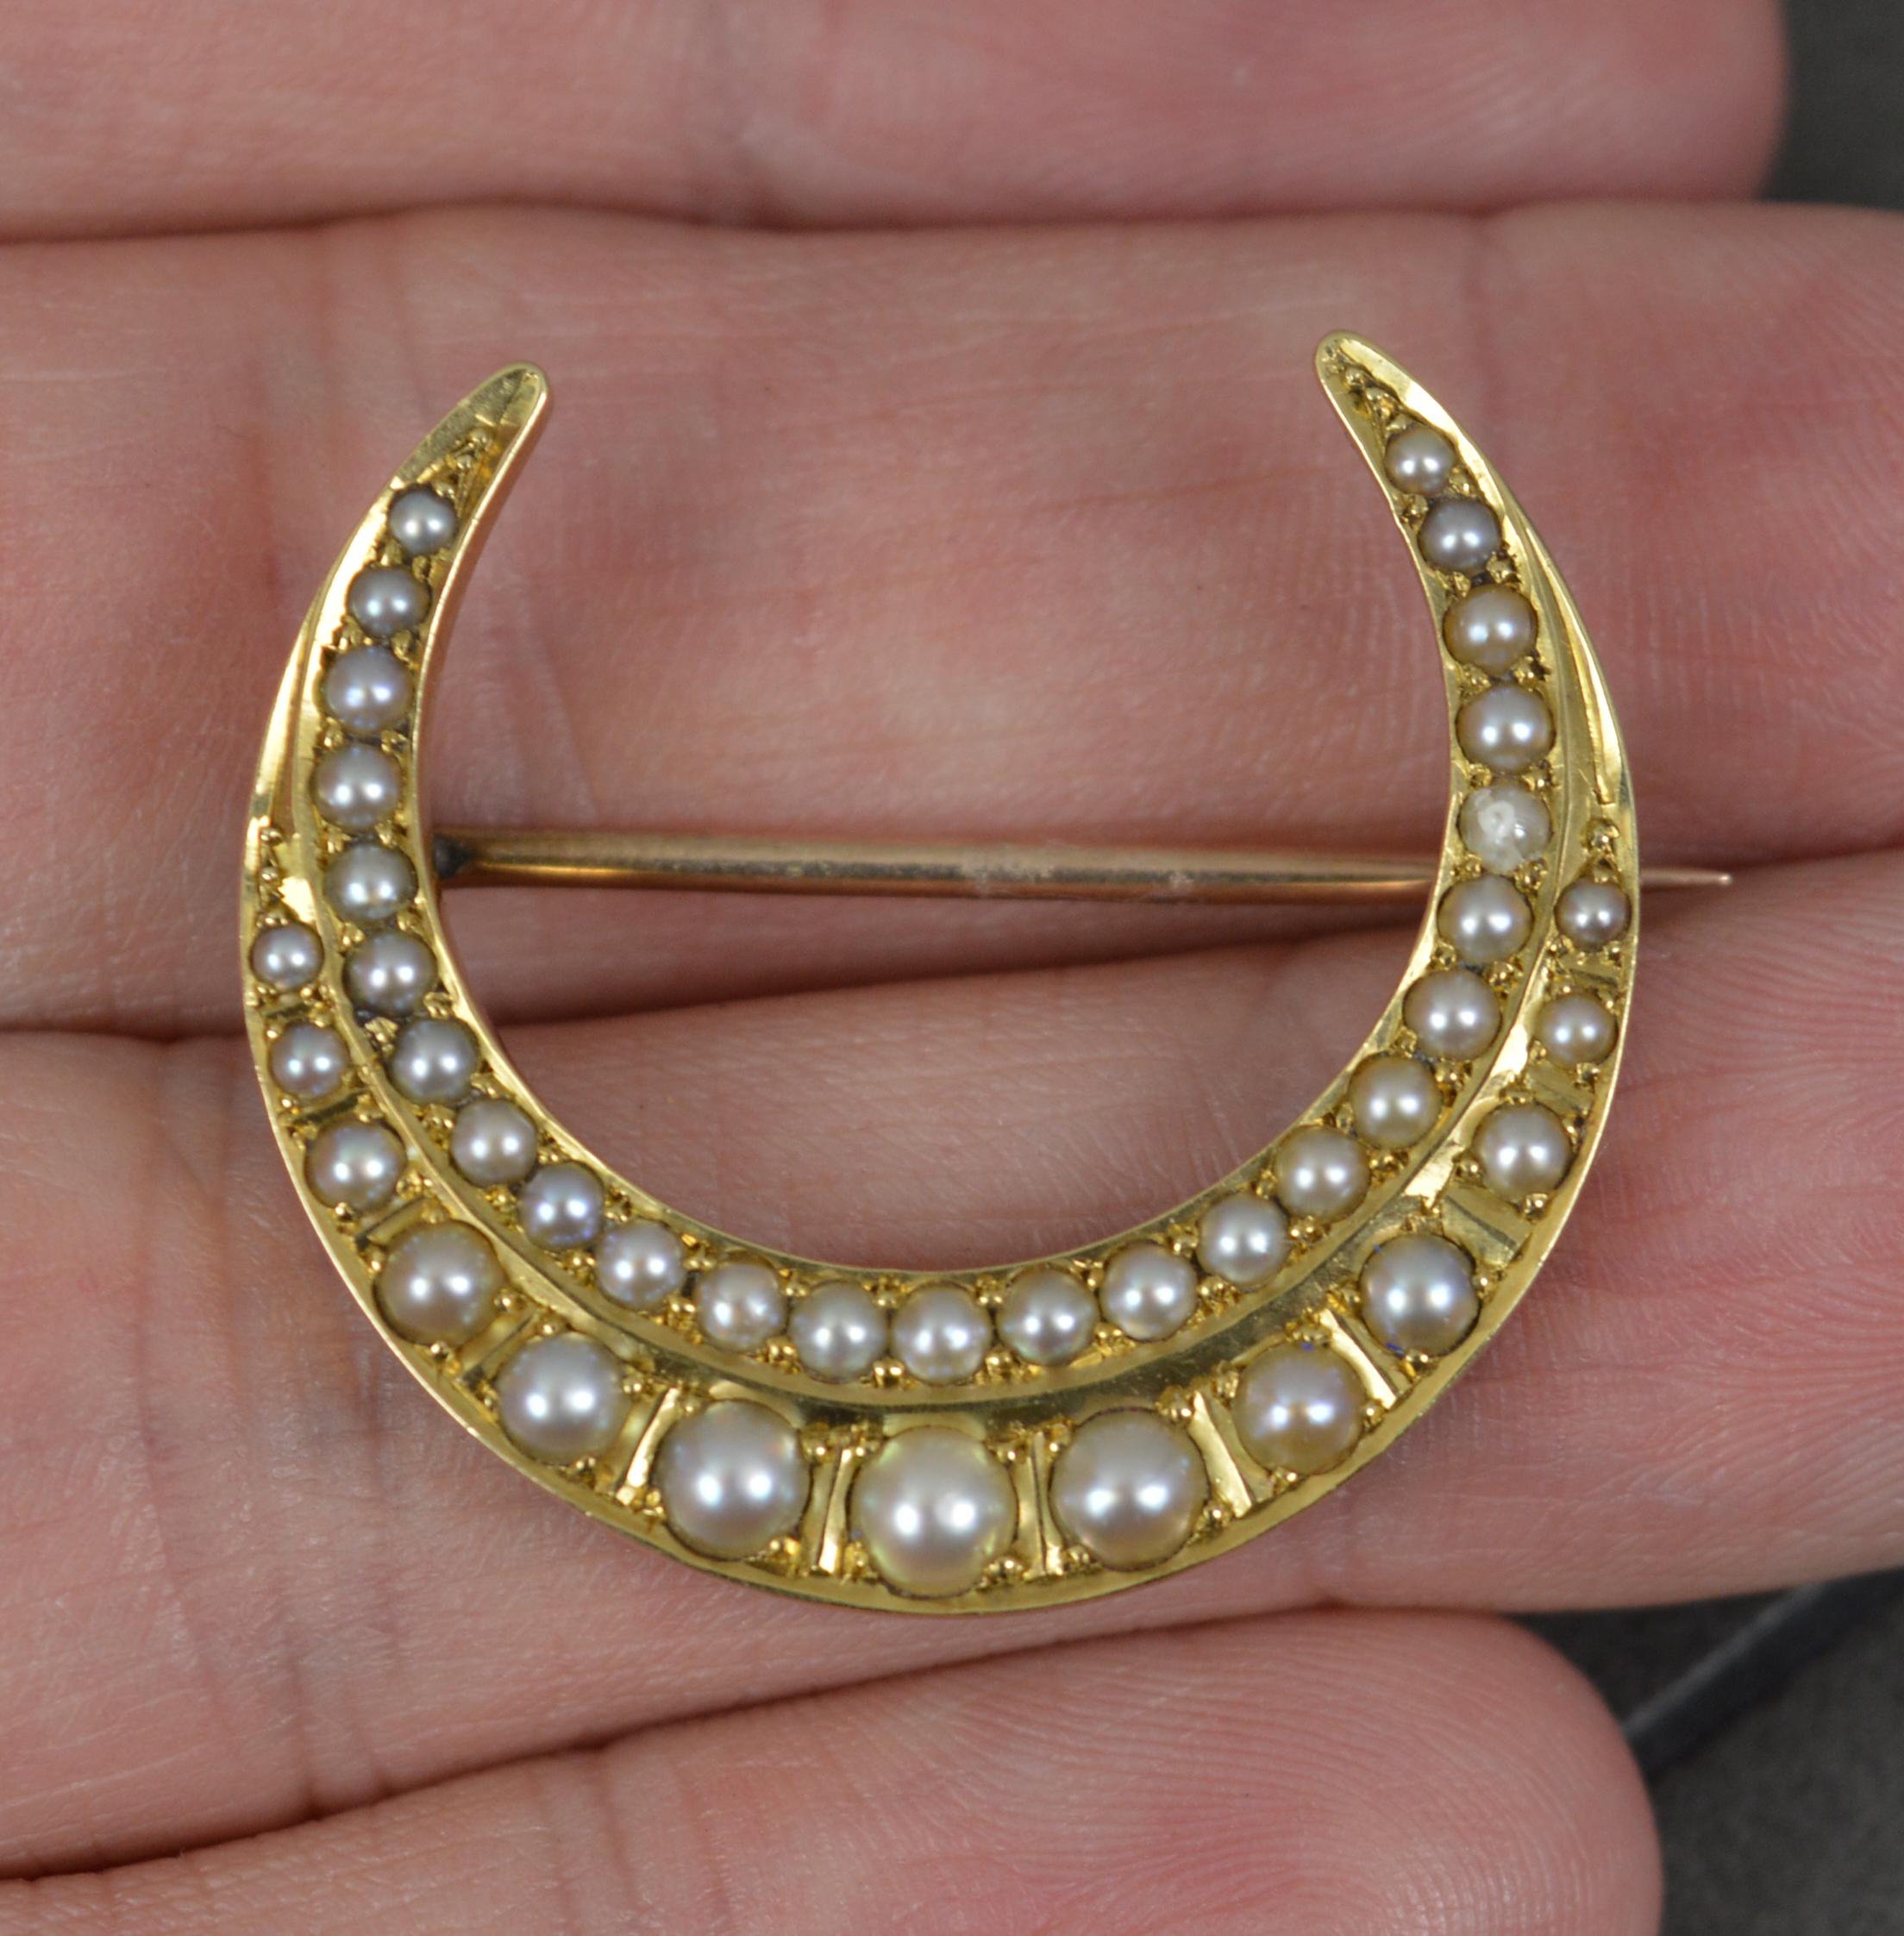 A late Victorian period brooch.
Solid 15 carat yellow gold example.
Set with natural pearls of graduated size of two row design.
An ever popular crescent shape.

CONDITION ; Excellent. Crisp pattern. Working pin and hinge. Securely set pearls. All